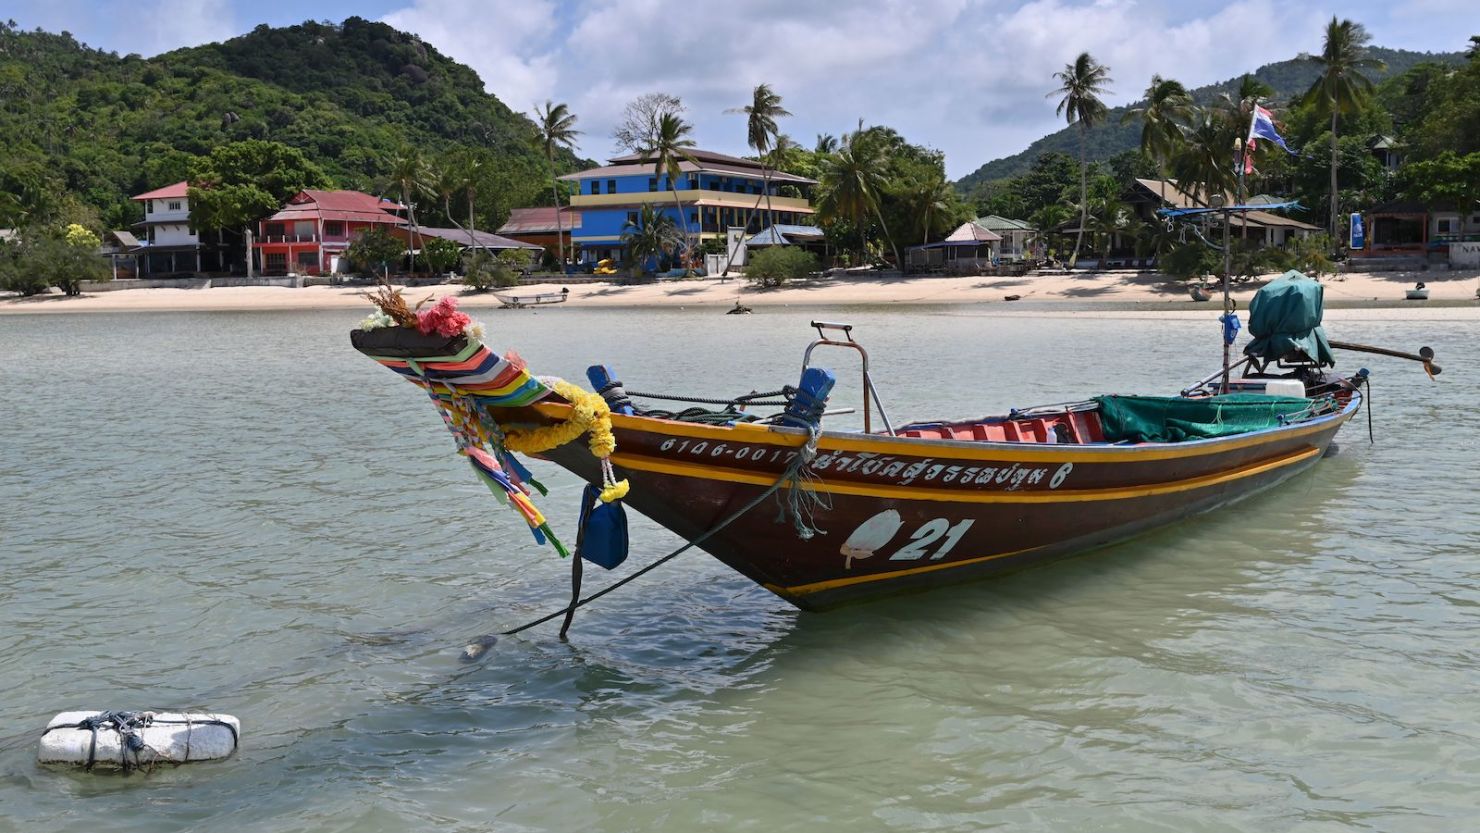 In this photo taken on August 18, 2020 a taxi boat is anchored along an empty beach in Chalok Baan Kao Bay in Koh Tao island in the Gulf of Thailand. 